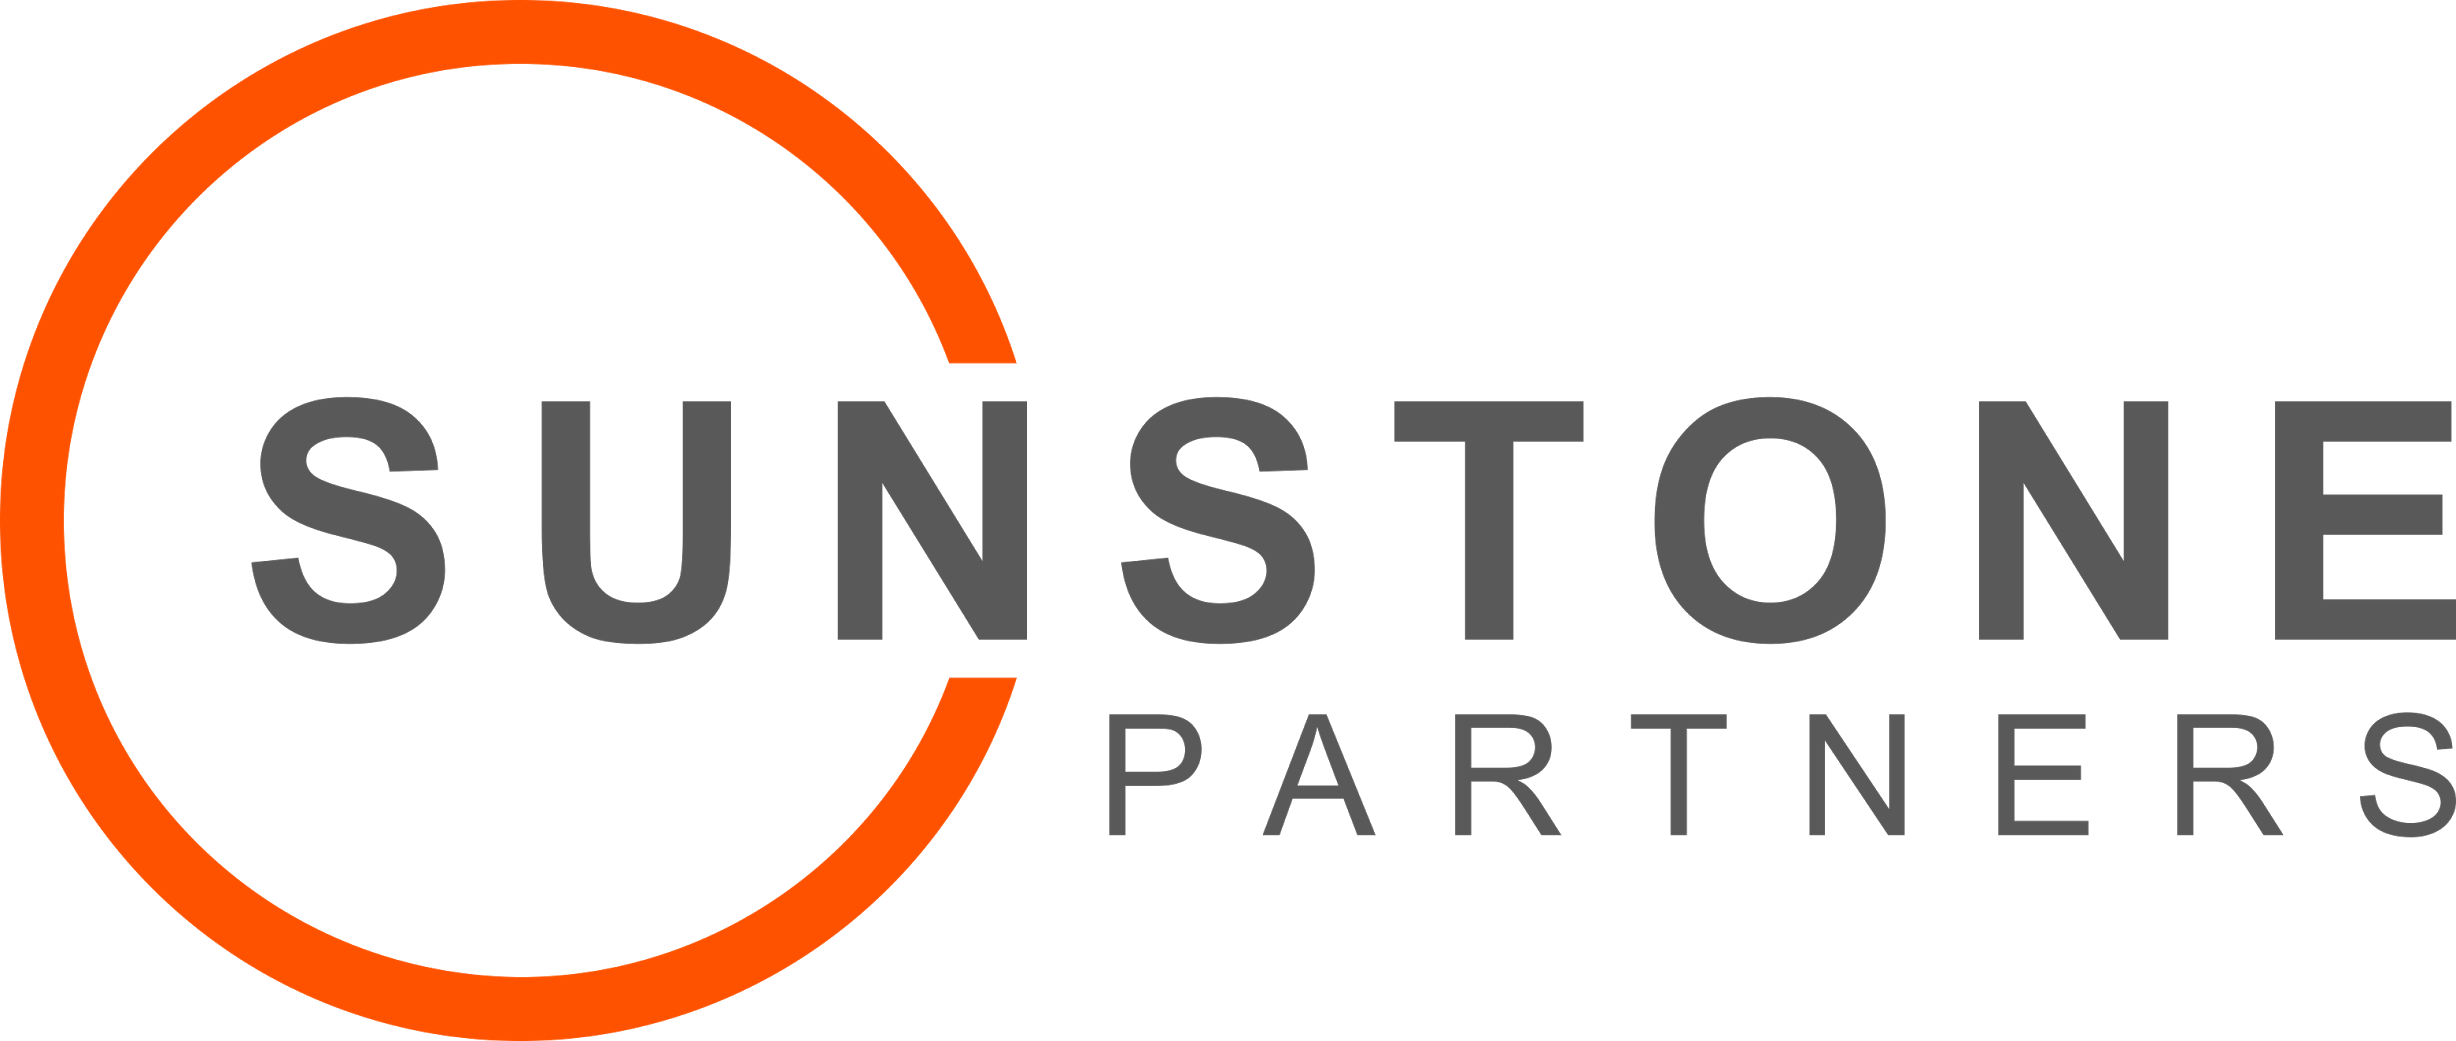 Sunstone Partners Closes First Fund at $300M